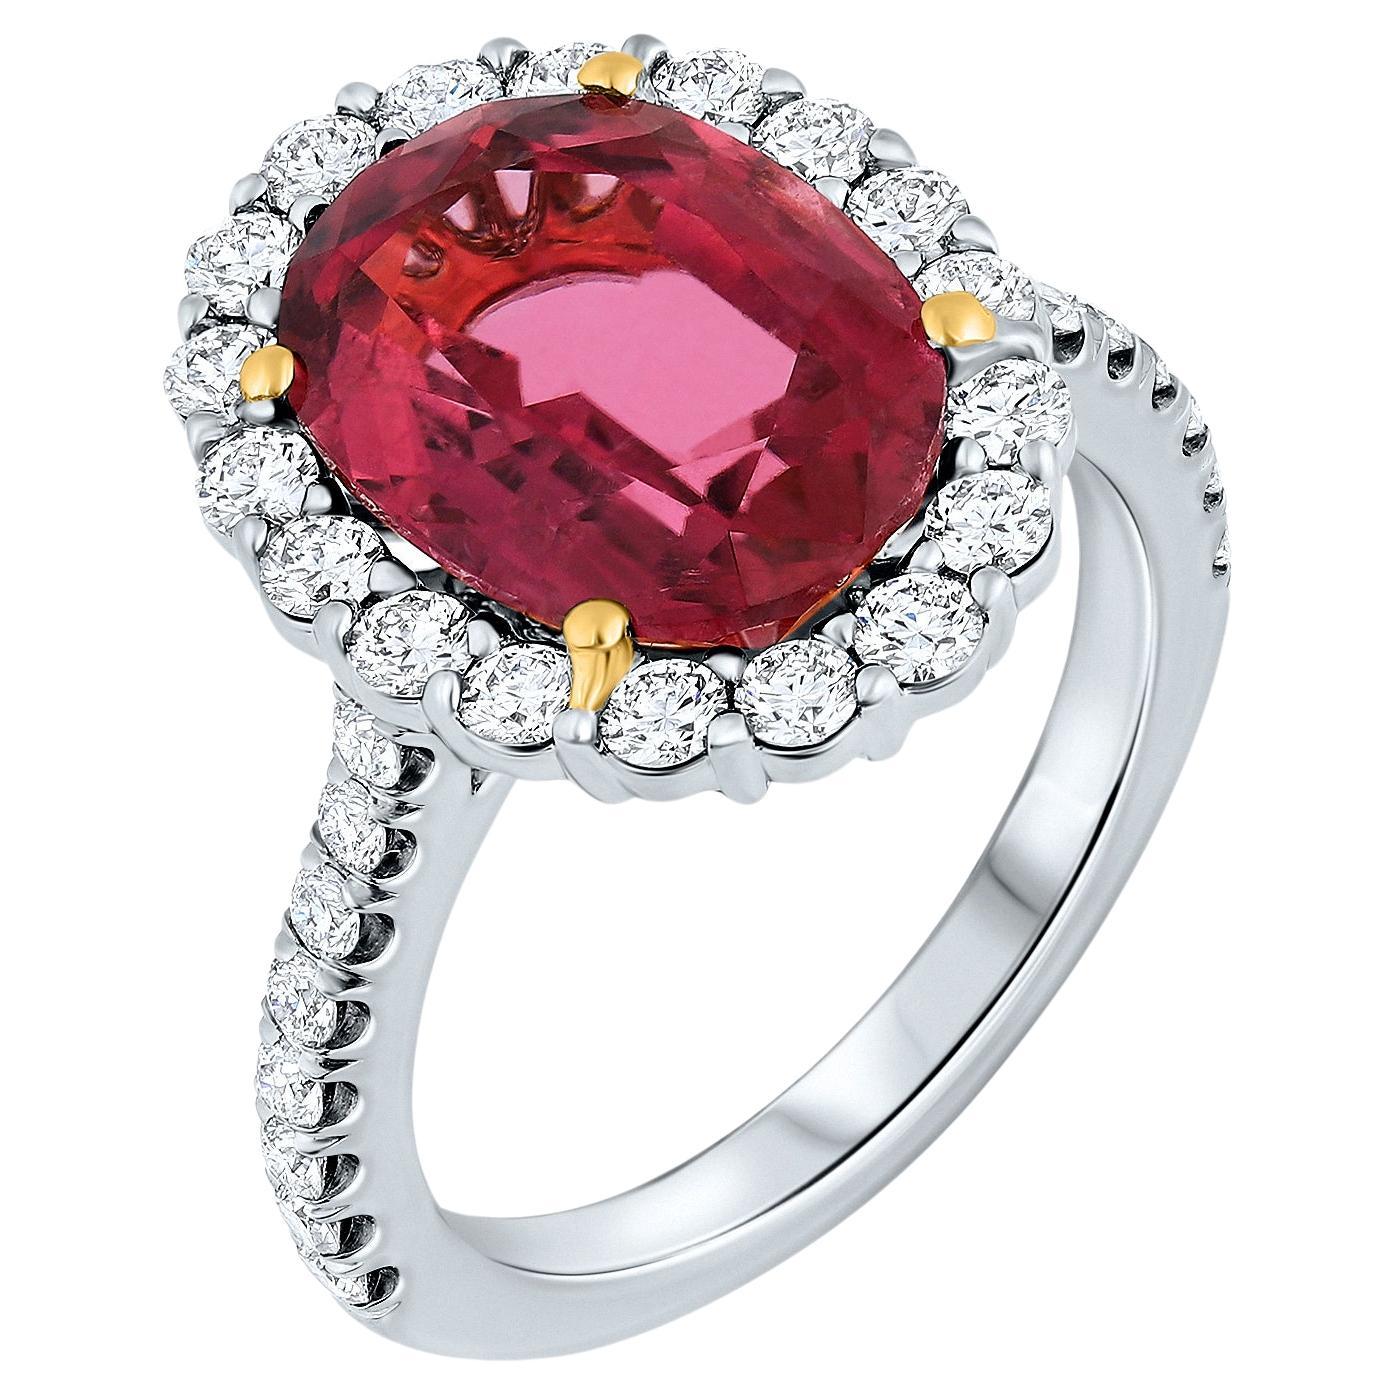 5.93 Carat Red Tourmaline & Diamond Halo Cocktail Ring, set in 18K Gold. For Sale